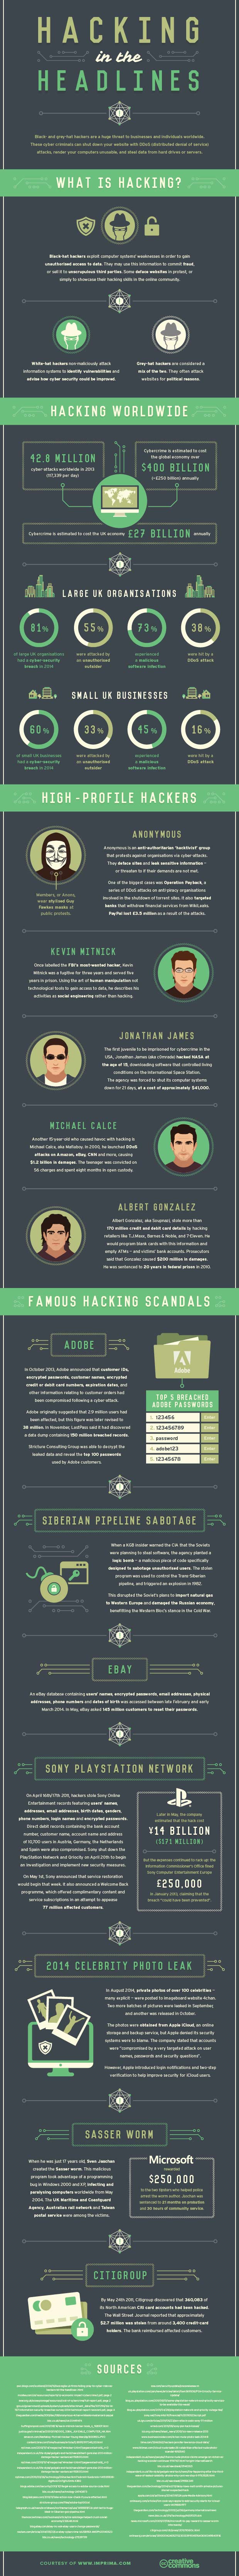 Infographic---hacking-in-the-headlines